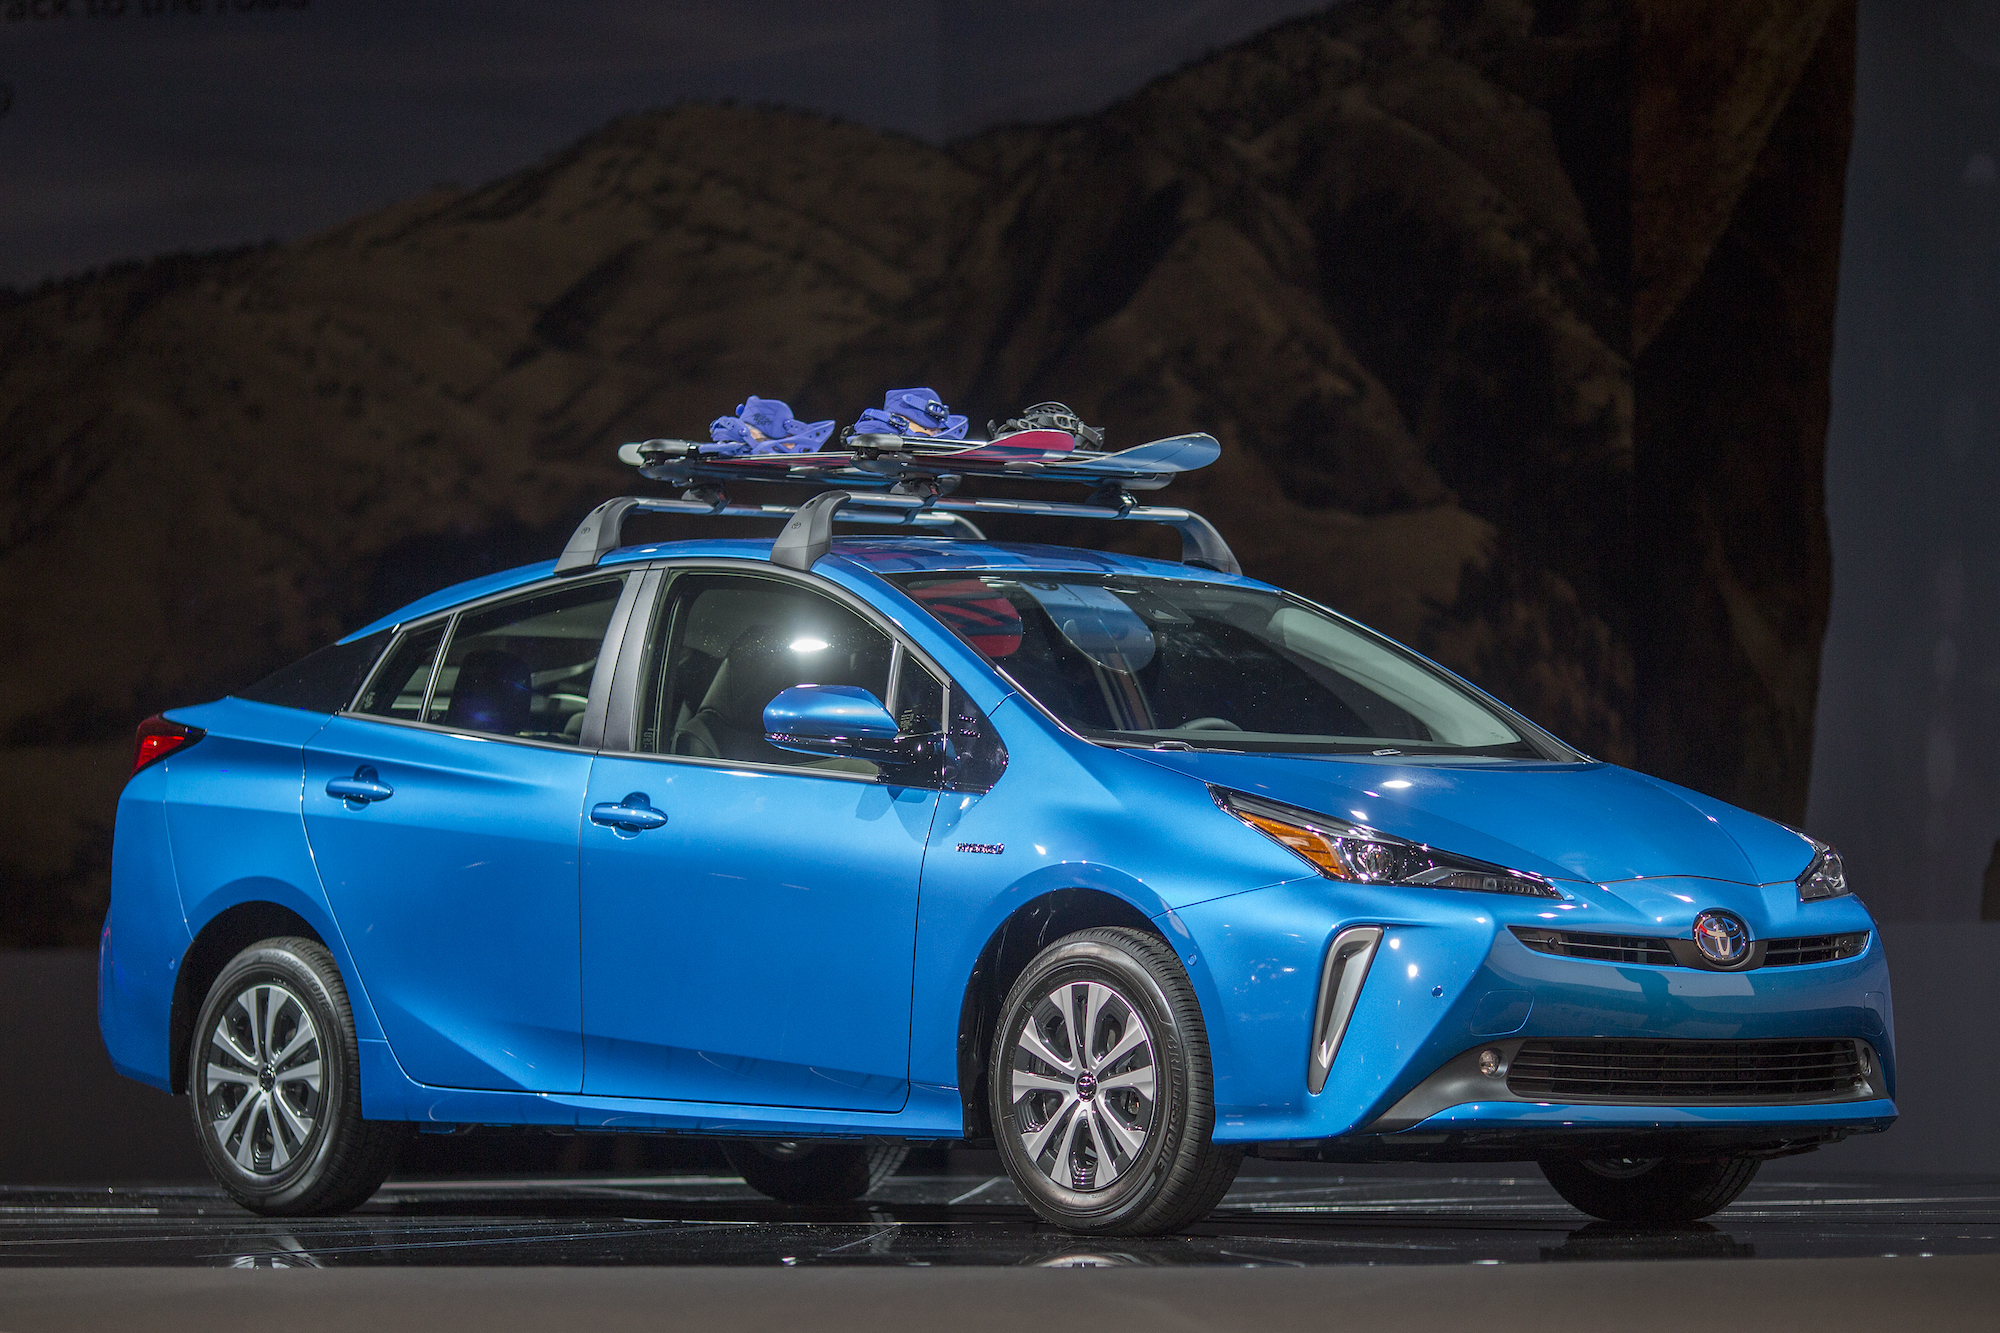 The 2019 Toyota Prius with all-wheel drive on display at AutoMobility LA on November 28, 2018, in Los Angeles